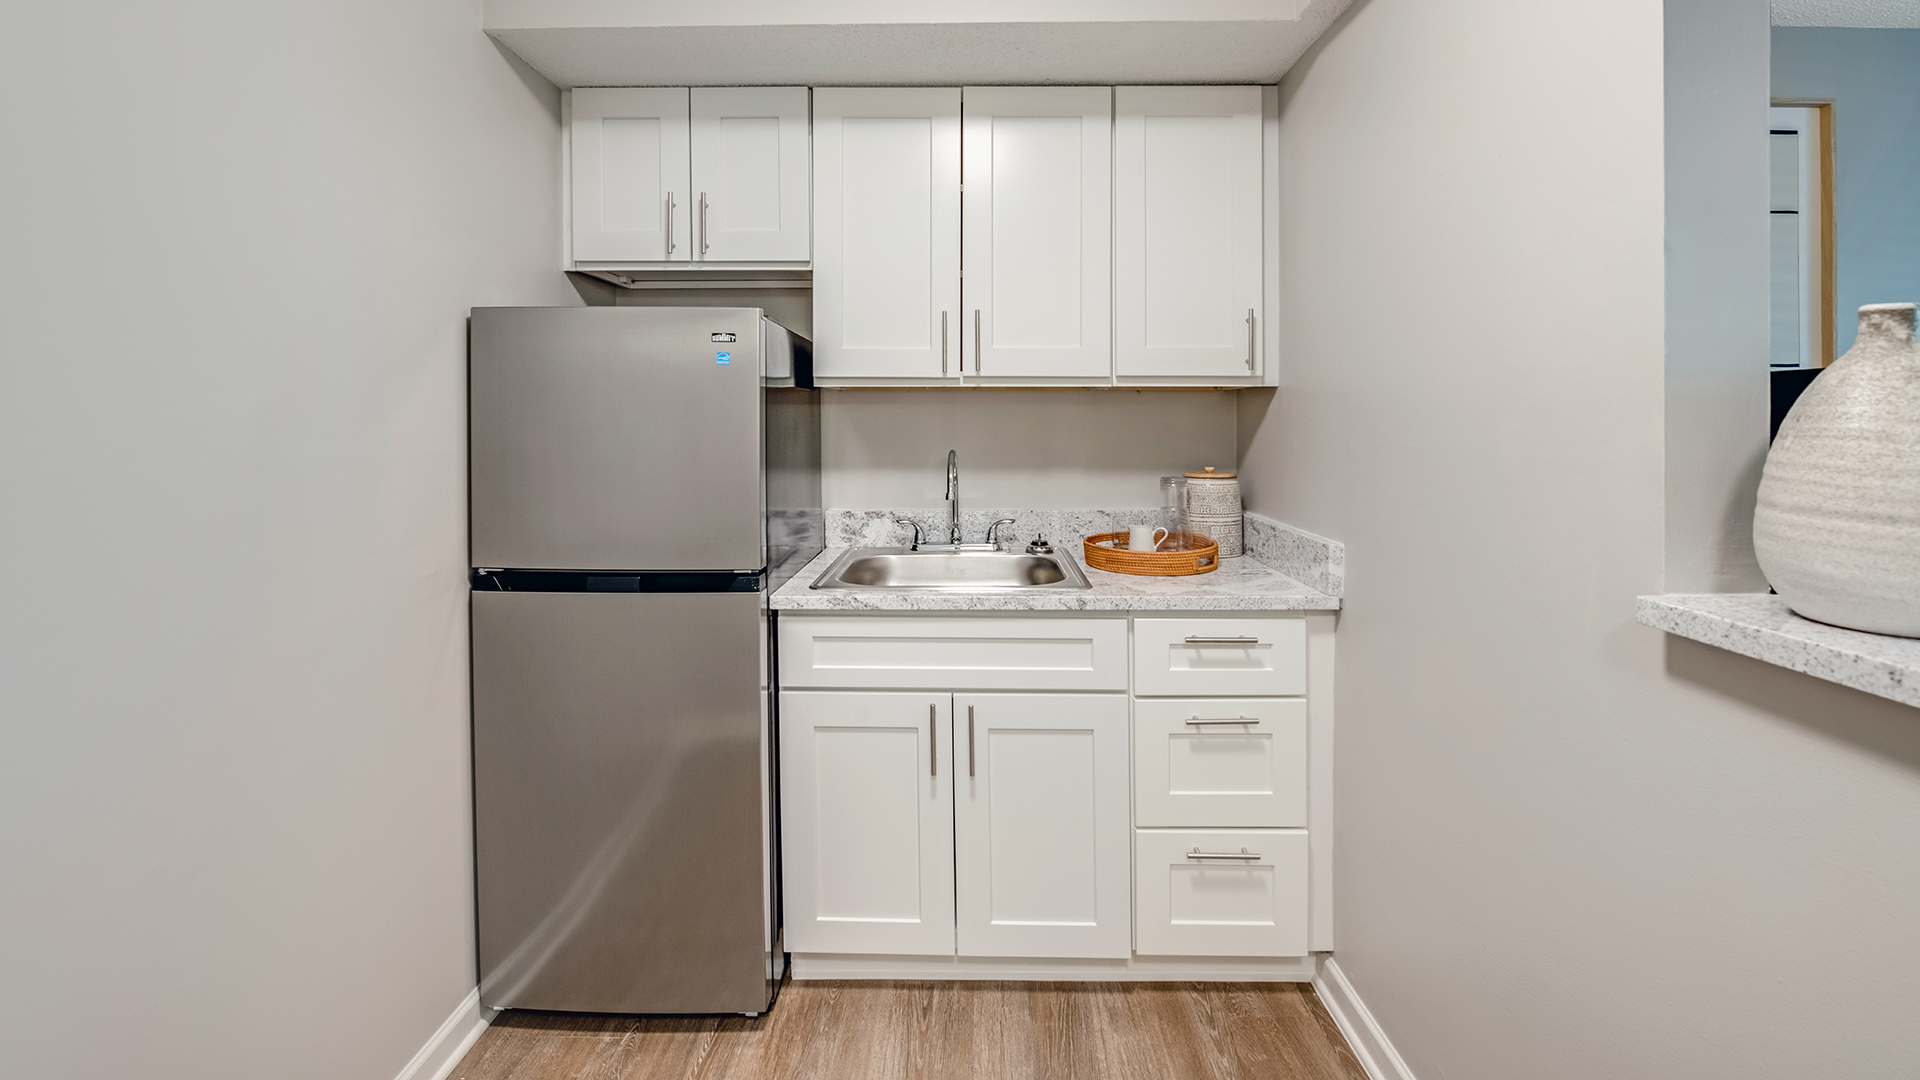 Apartment kitchenette showing fridge and cabinets with a sink